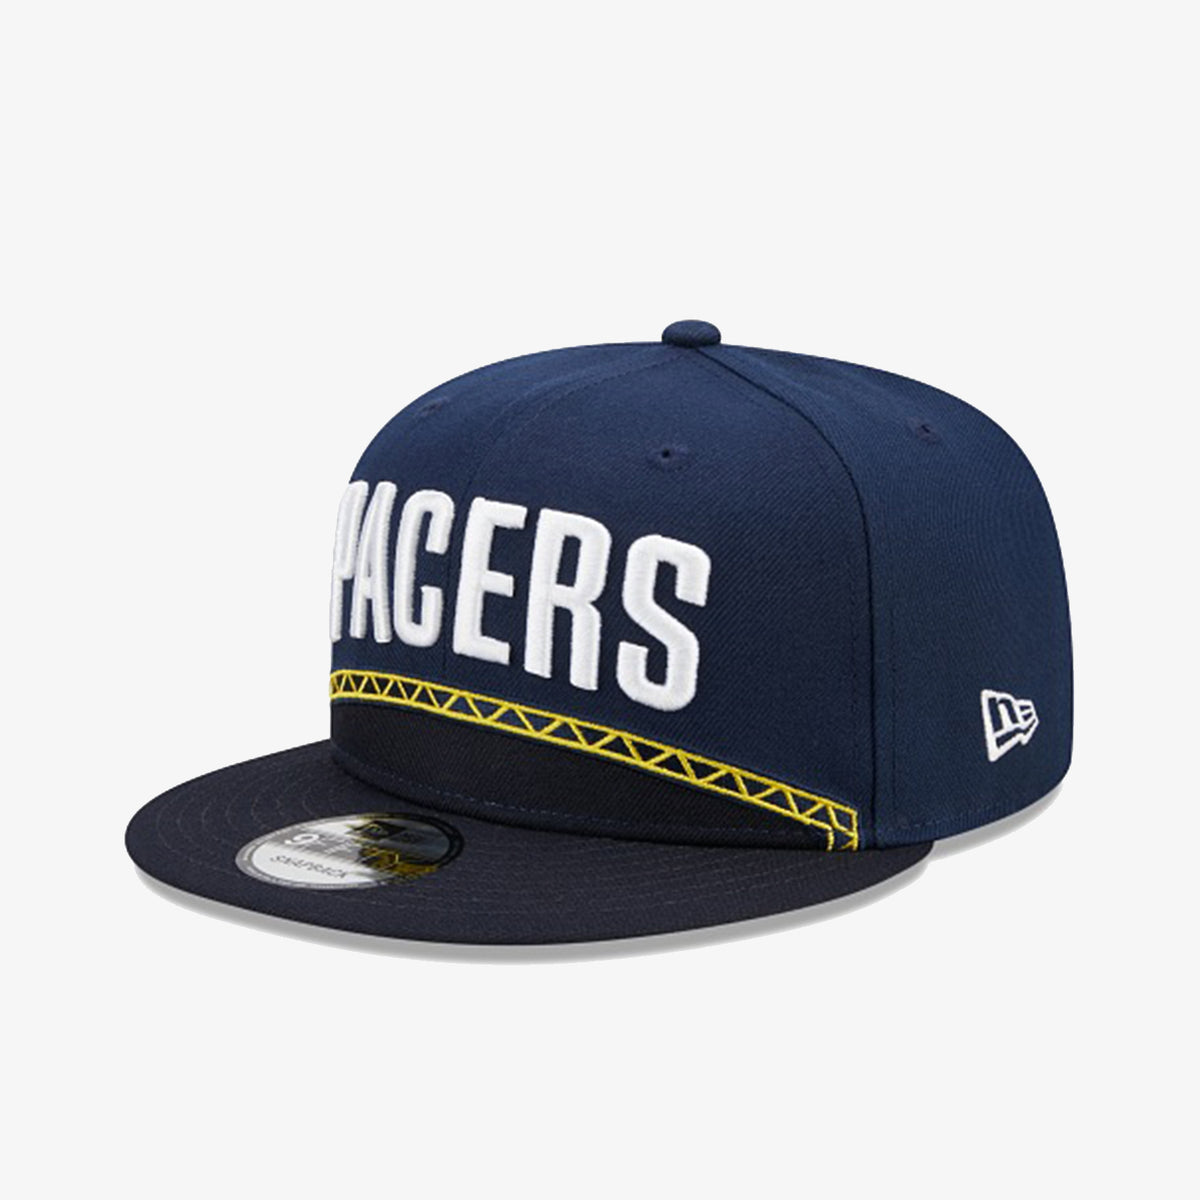 Indiana Pacers 9Fifty City Edition Snapback